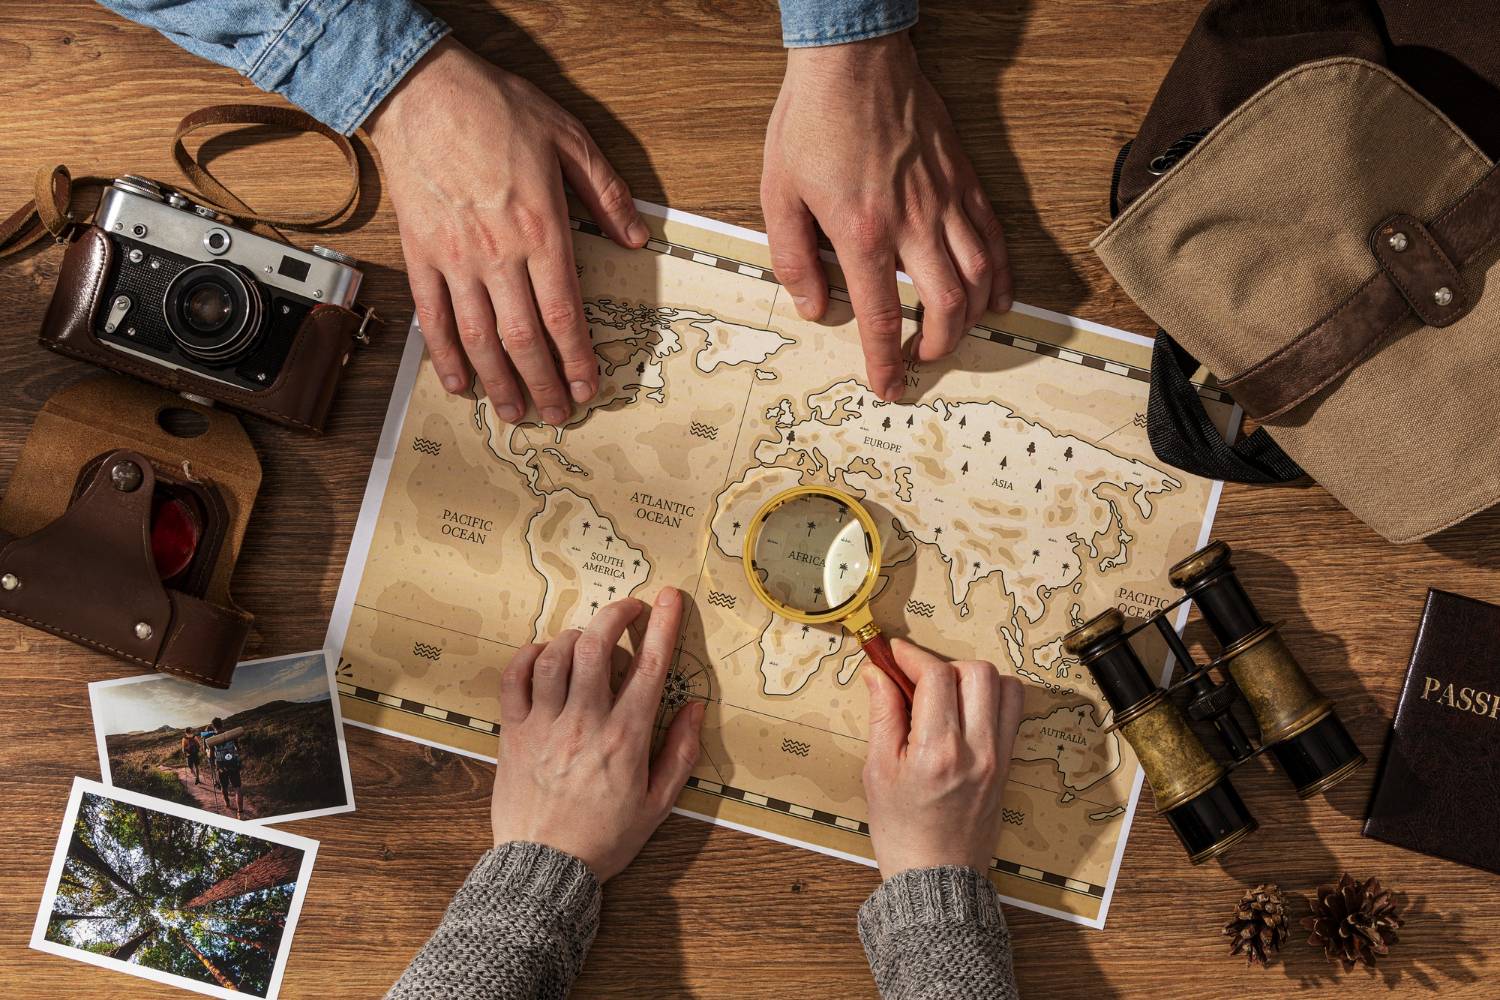 Hands examining a world map with a magnifying glass, camera, and binoculars, planning an adventure.